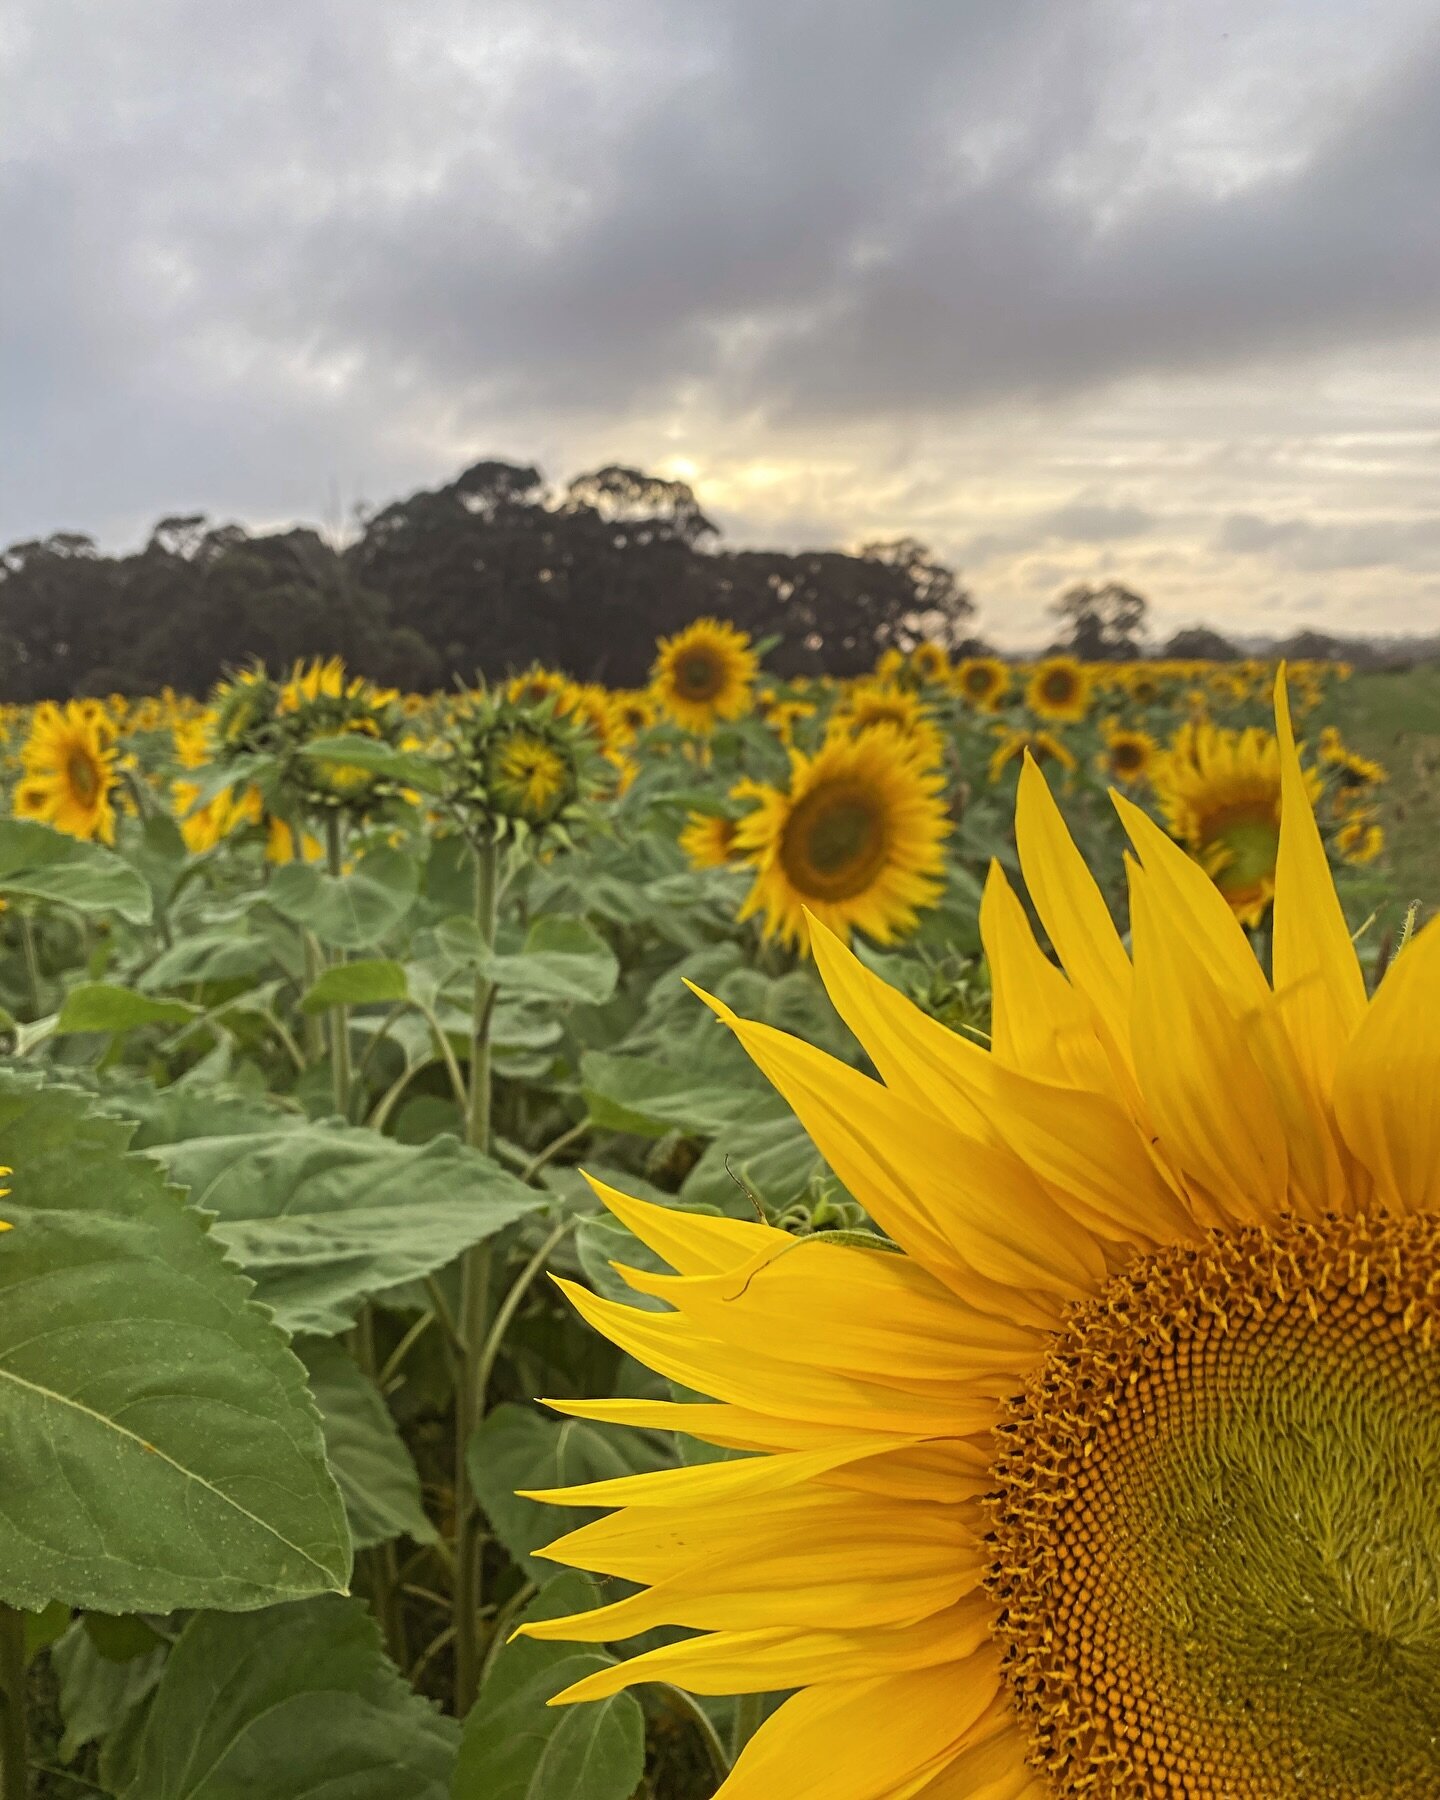 Sunflowers are calling! 🌻🌻
.
.
Our fields are bursting with golden beauties this week, and we&rsquo;re open for pick-your-own sessions! All the details are on our website.
.
.
Come bask in the sunshine, wander through rows of cheerful blooms, and f